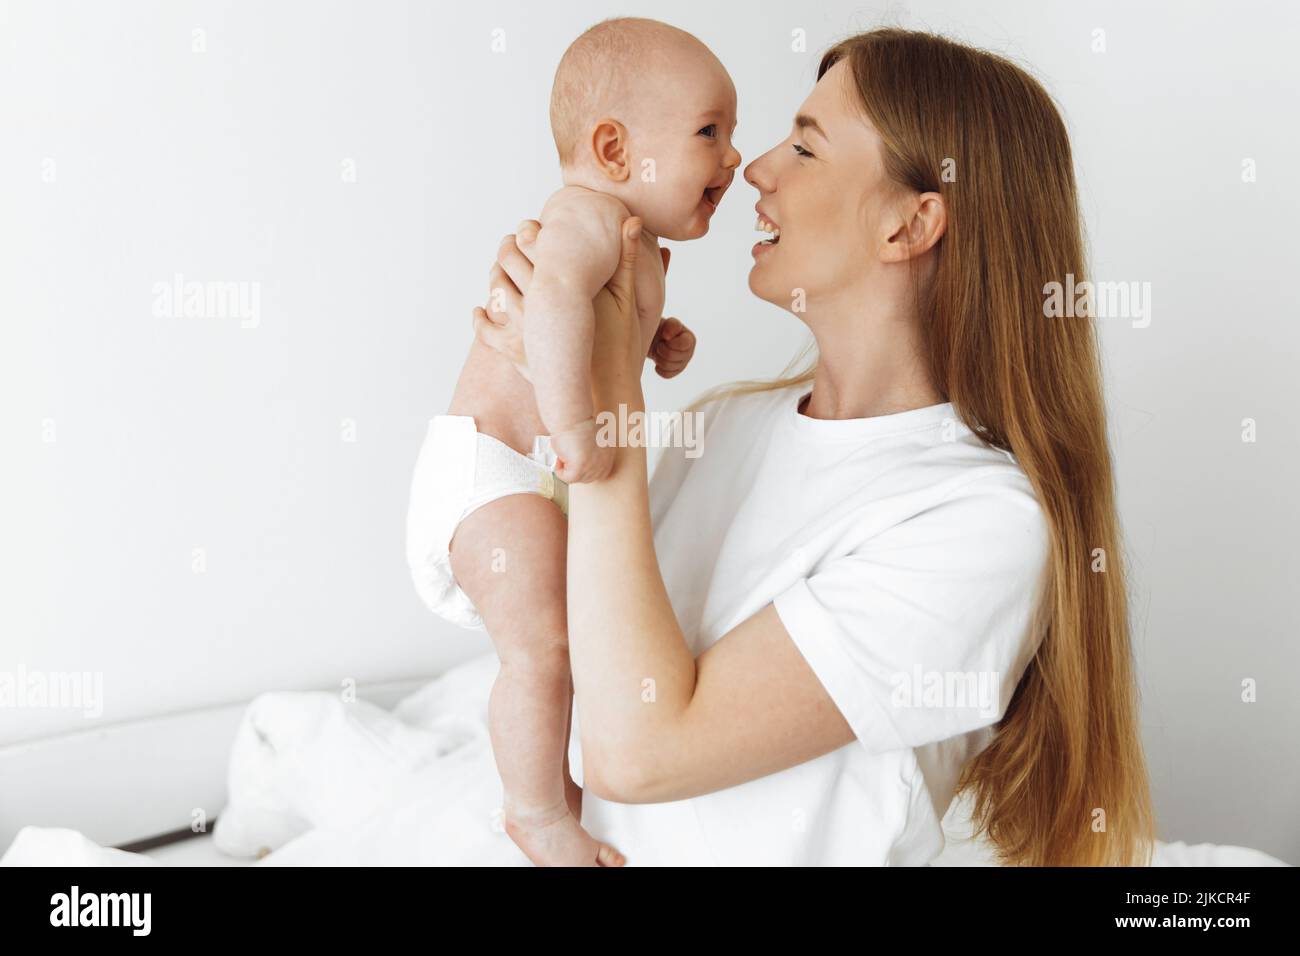 Mother Breast Feeding a Cute Baby. Newborn Girl. Stock Image - Image of  catwalk, lactancia: 69109467